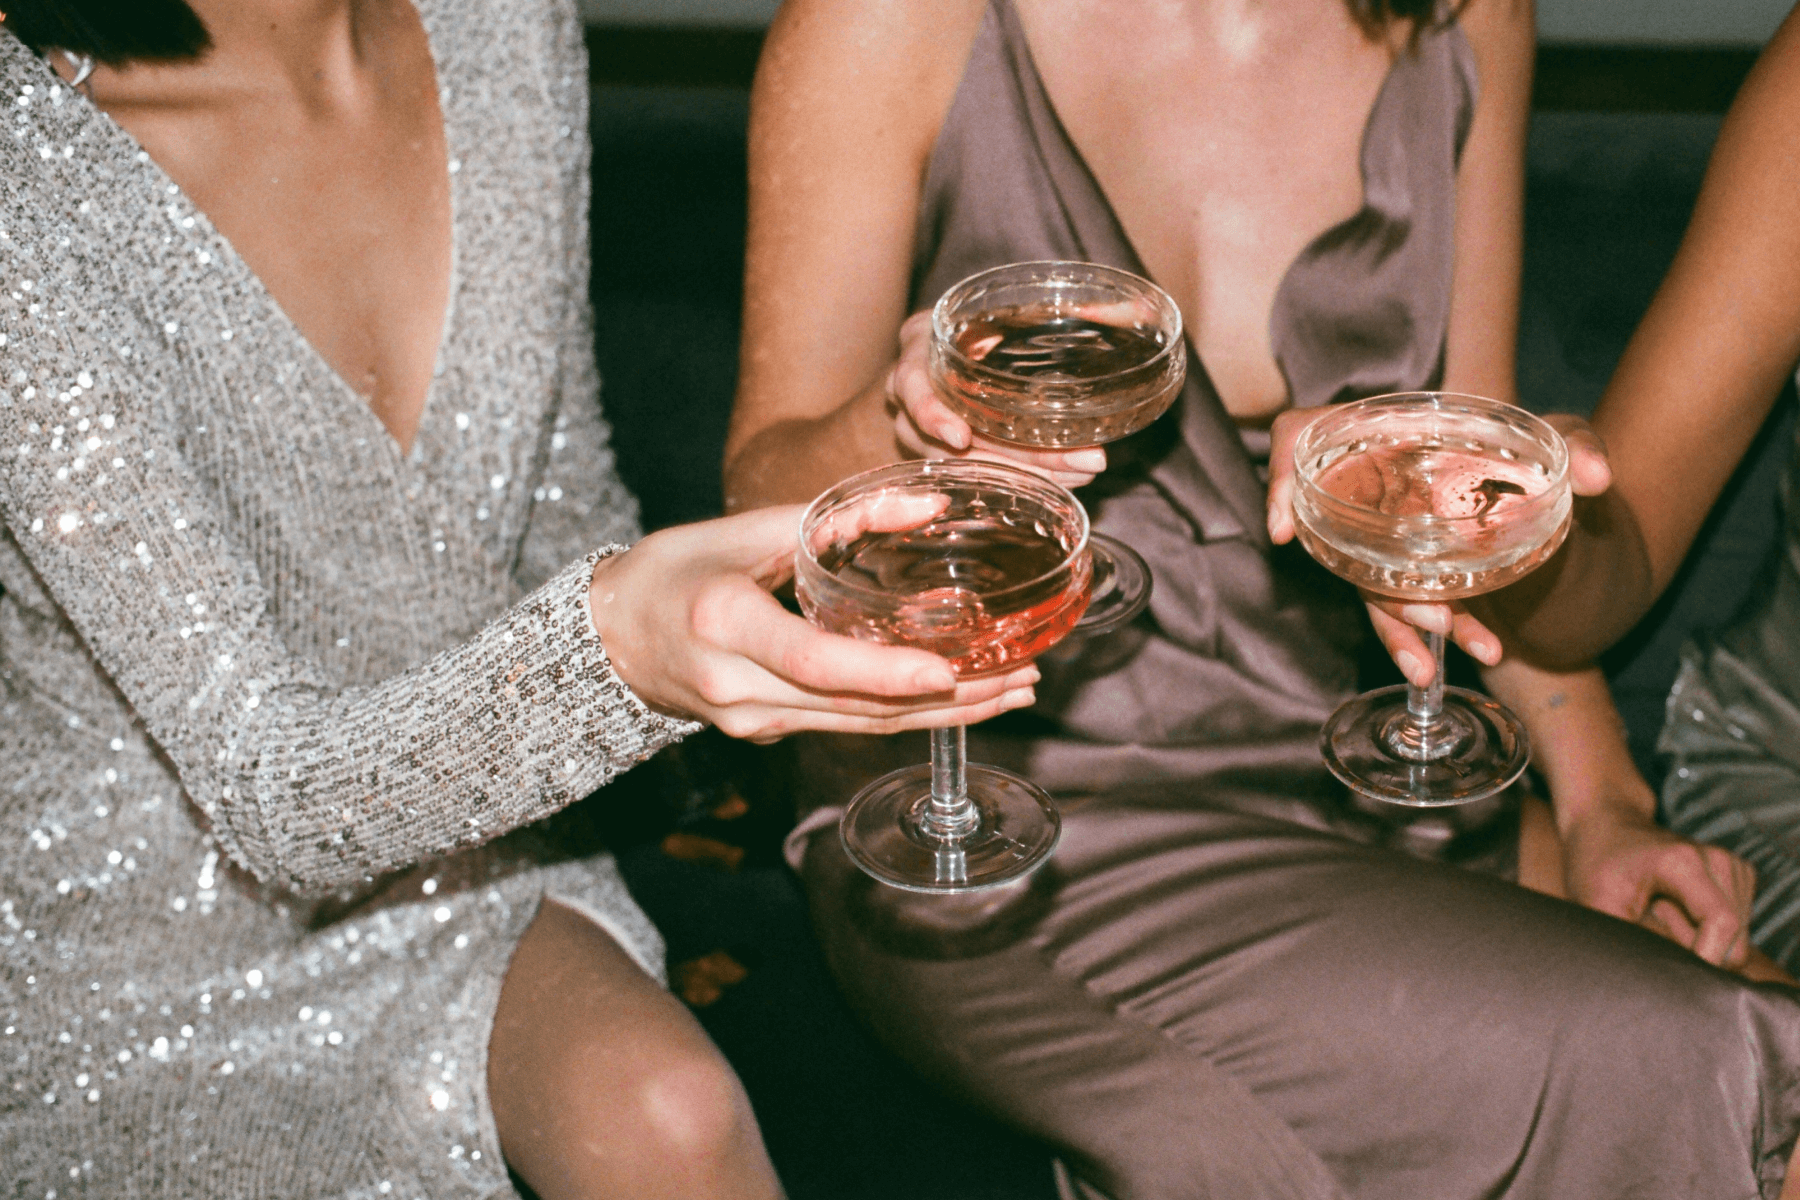 Three women with faces out of frame in formal attire clink coupe glasses.